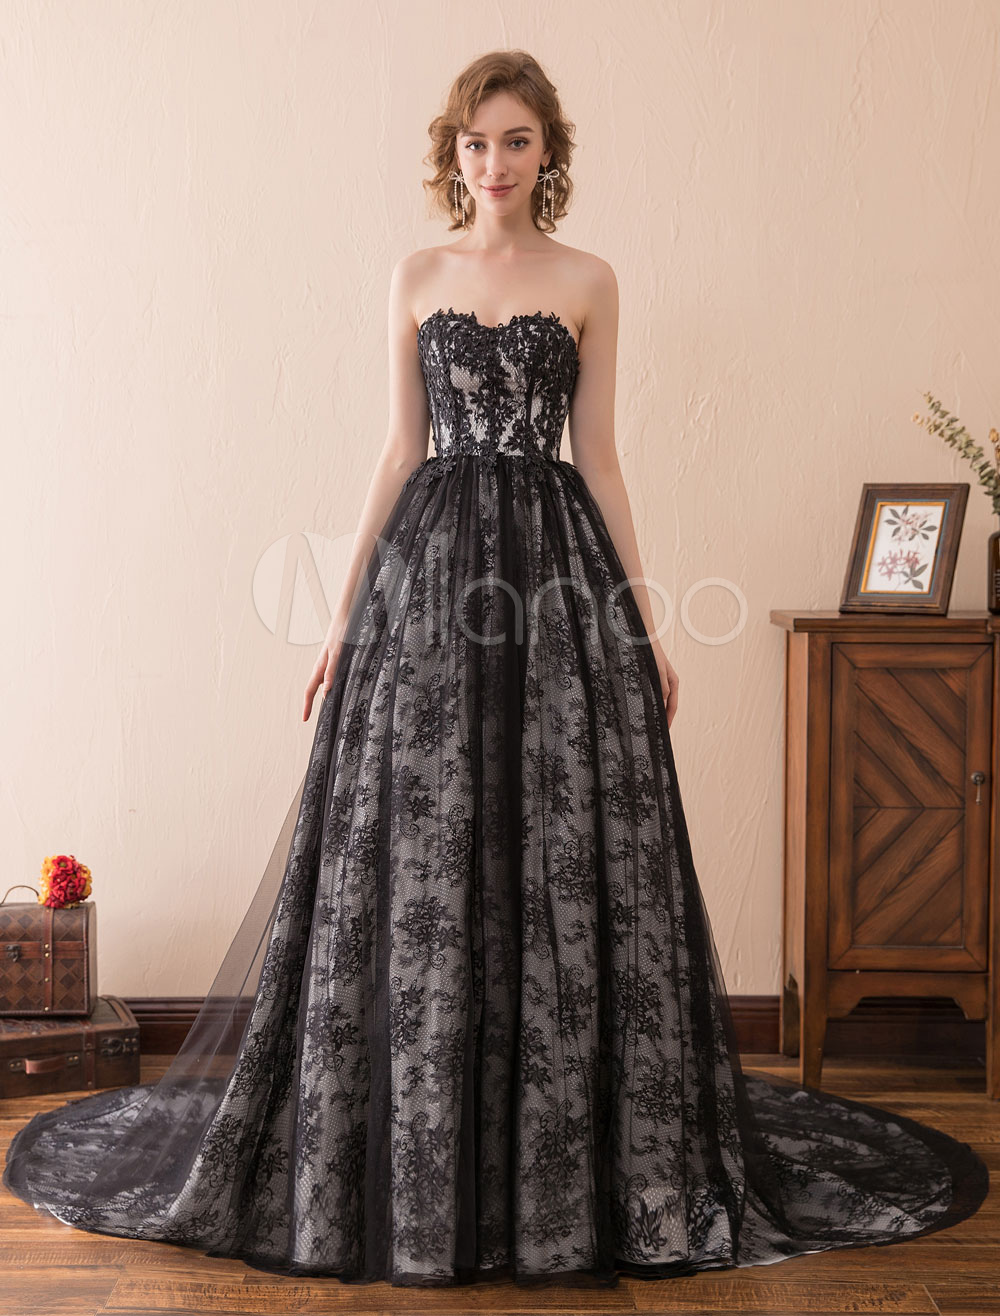 Black Wedding Dresses Lace Strapless Bridal Gown Sweetheart Neckline Princess Bridal Dress With Train photo